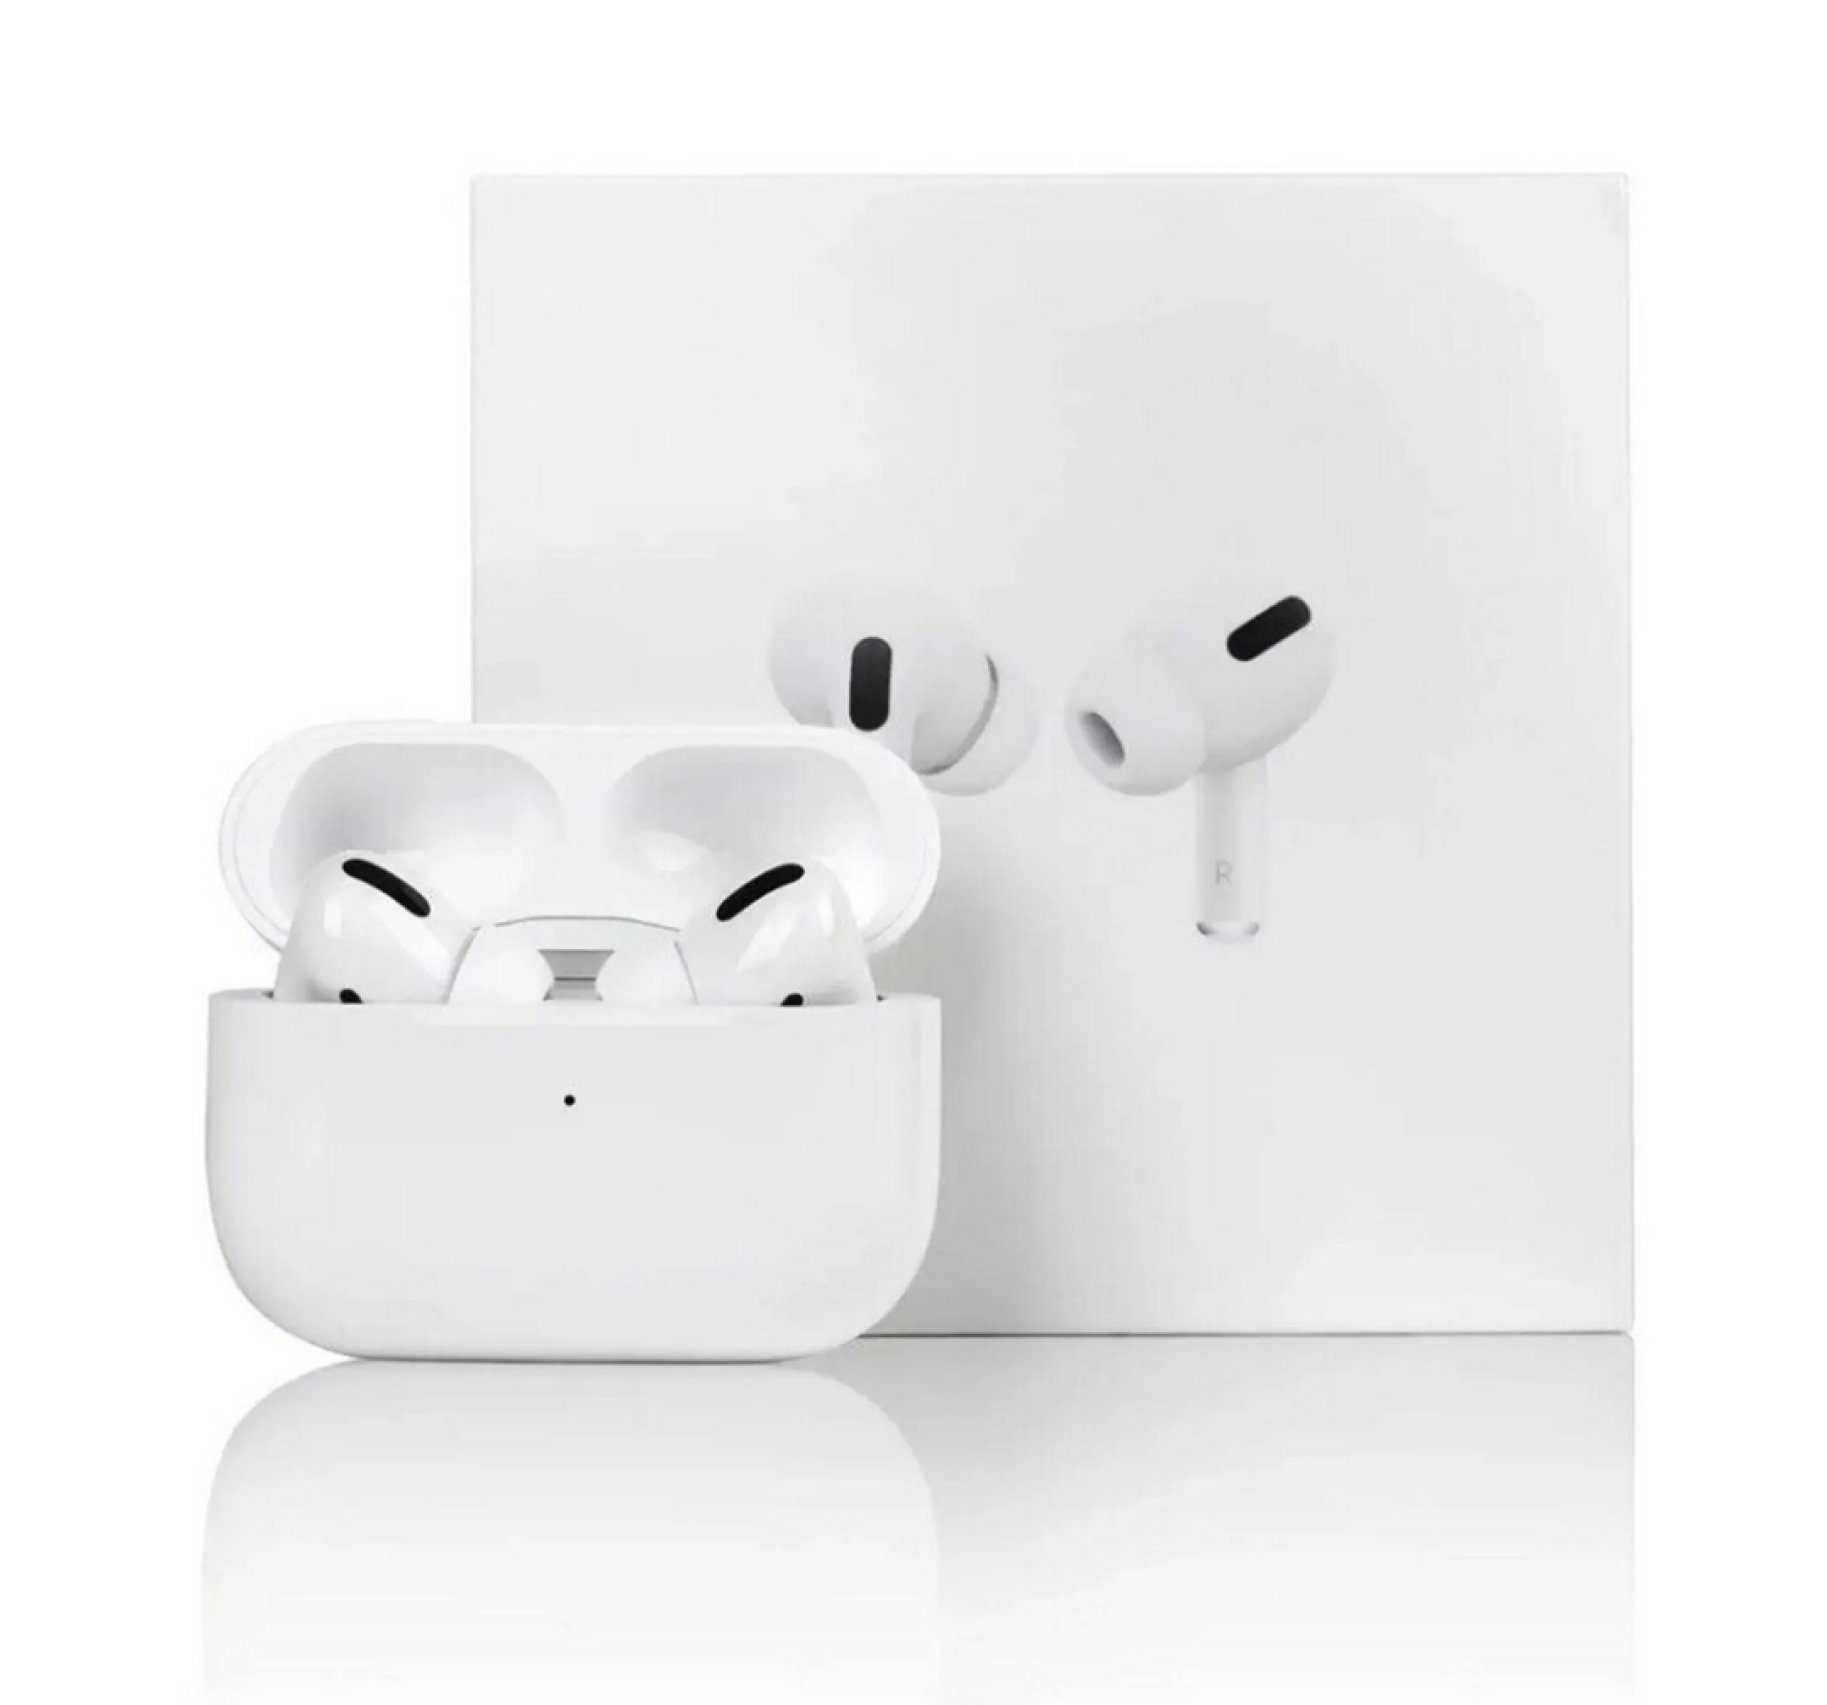 OIITH Bluetooth Навушники für Apple iPhone & Android Air pods Kabellose Kopf wireless Навушники-вкладиші